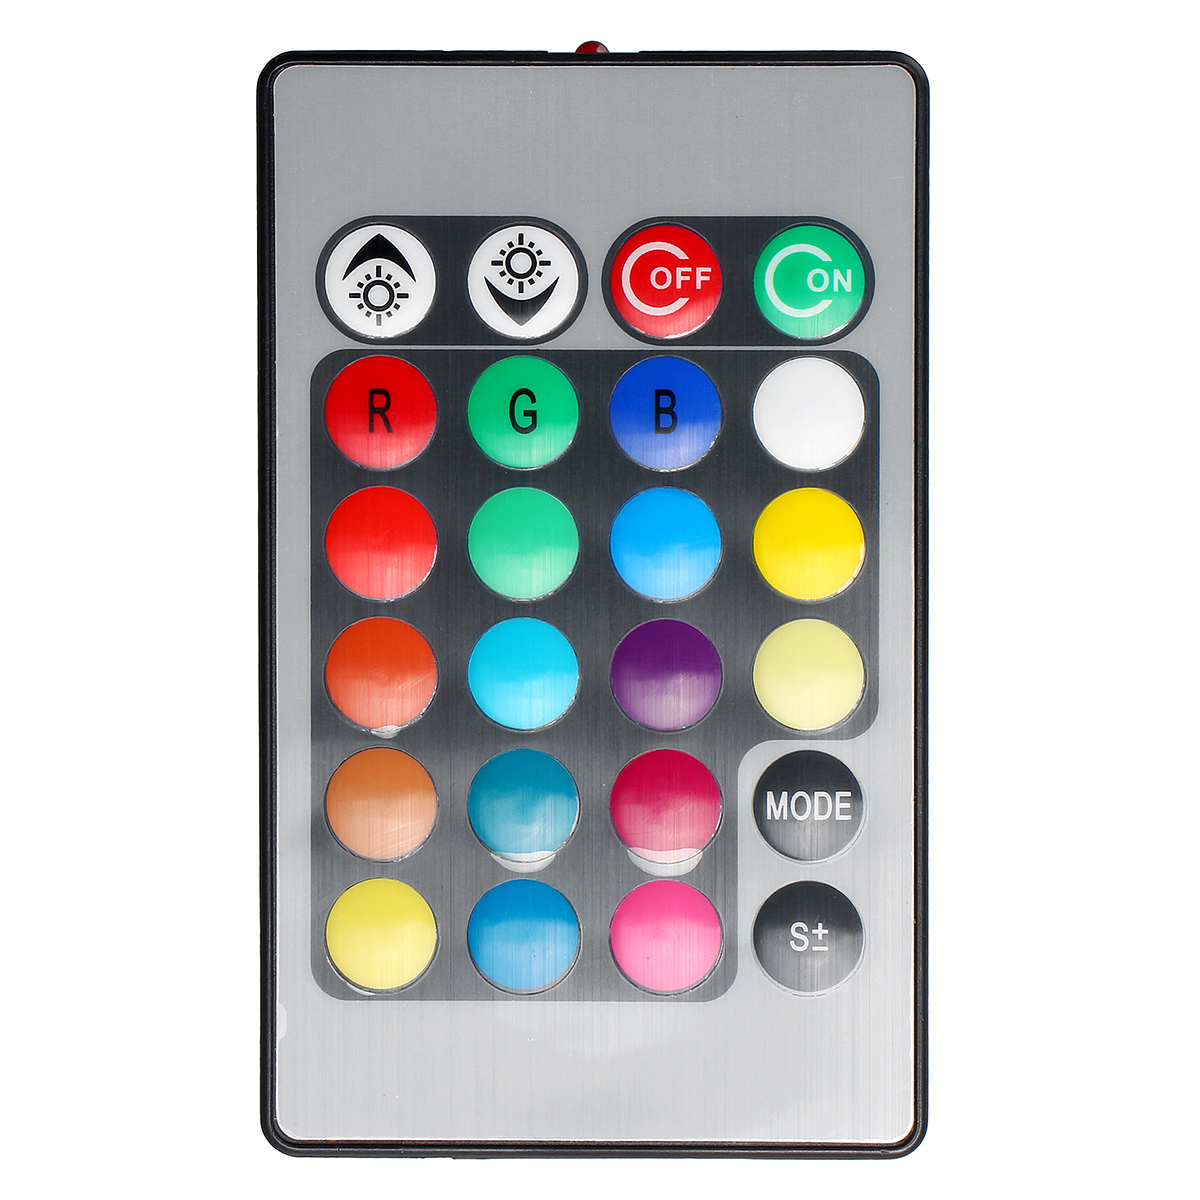 10-inch-LED-Ring-Fill-Light-3-Modes-of-Color-Temperature-Colorful-RGB-Live-Broadcast-Desktop-Phone-H-1871503-8